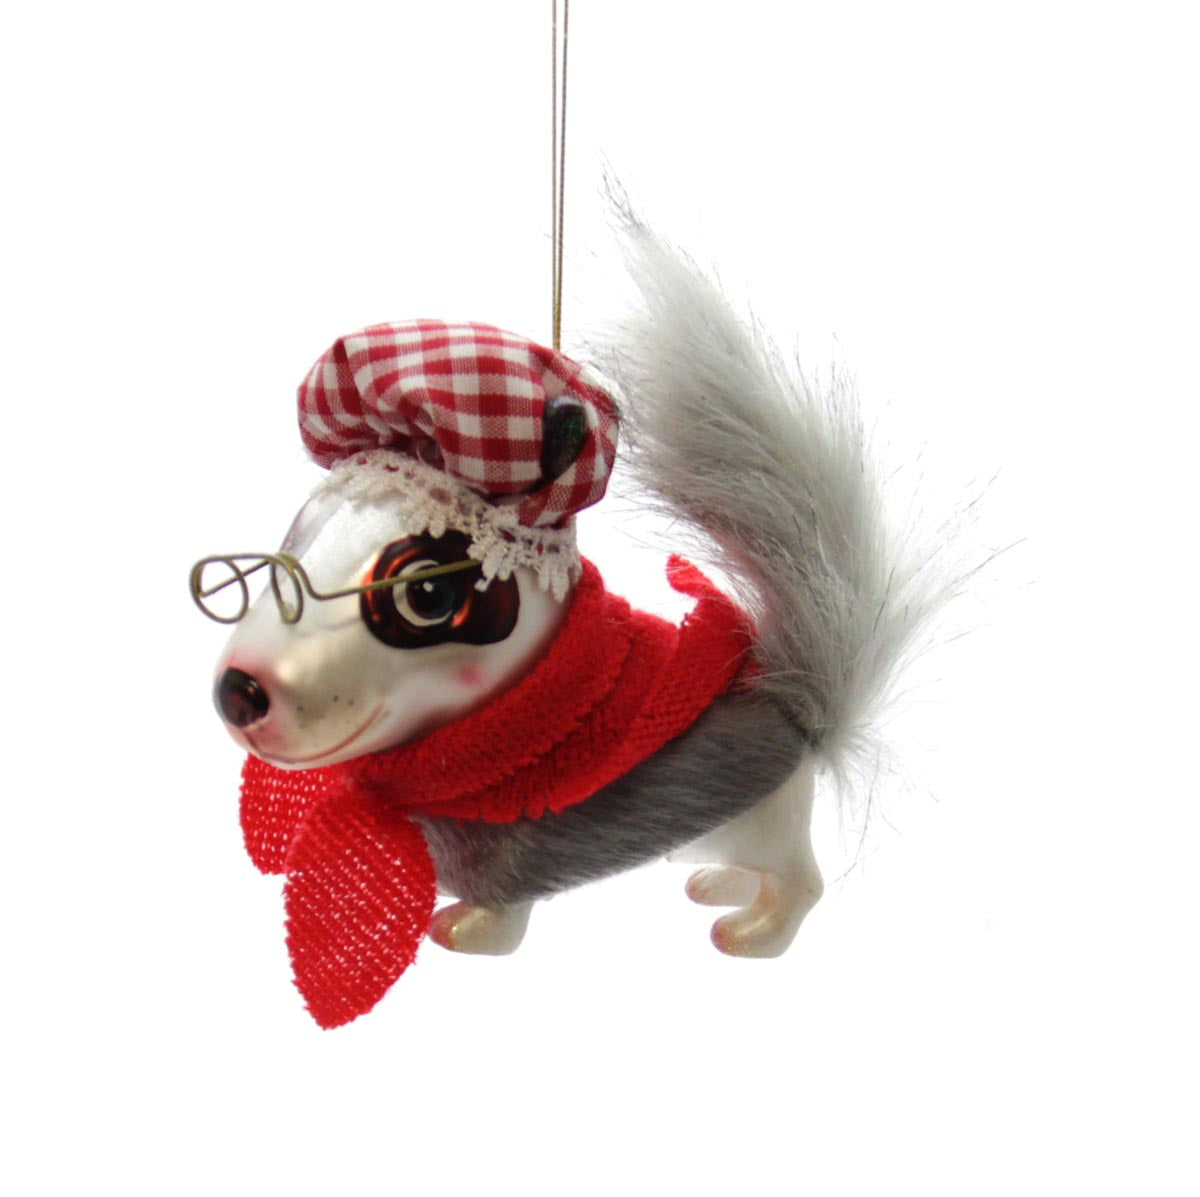 Bull Terrier Dog as a Wolf Ornament, Red Riding Hood collection